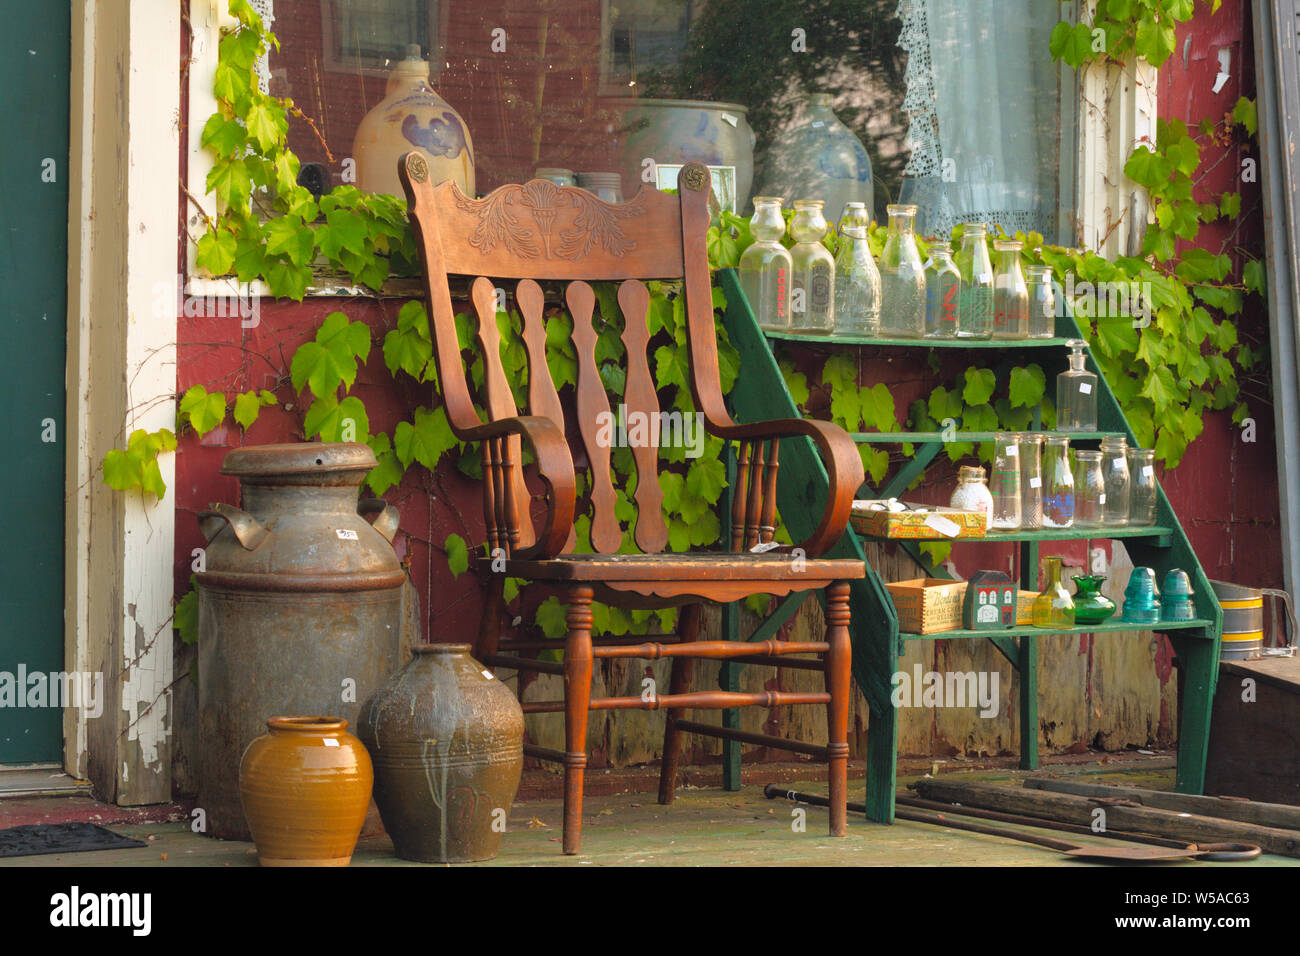 An antique store in Sackets Harbor, Thousand Islands Region, Jefferson County, New York Stock Photo